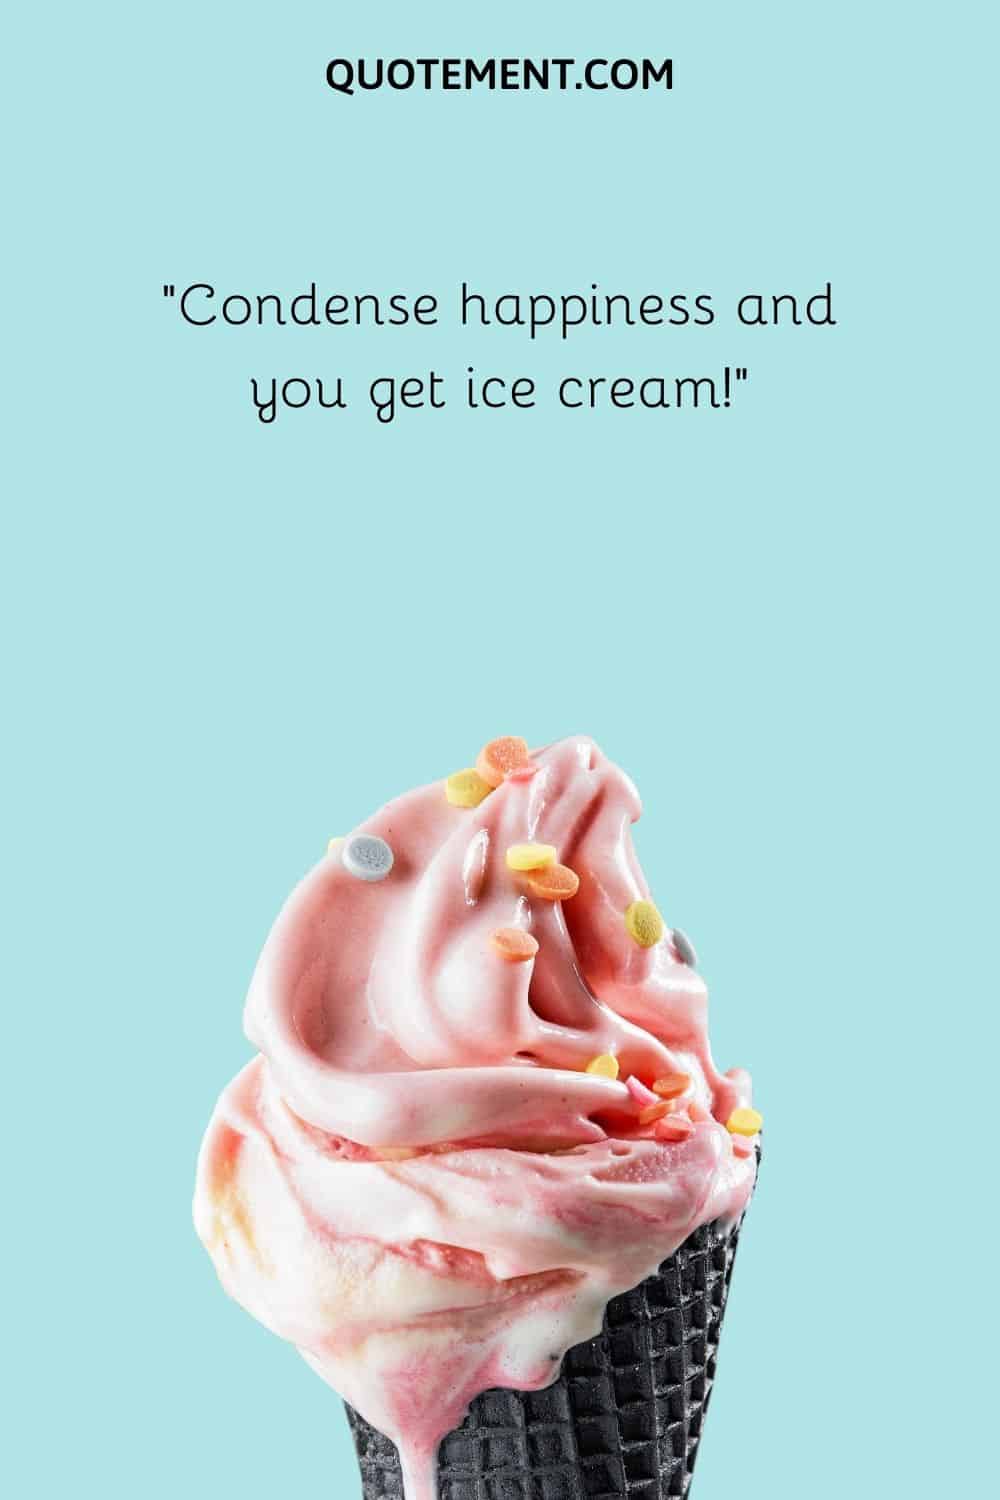 Condense happiness and you get ice cream